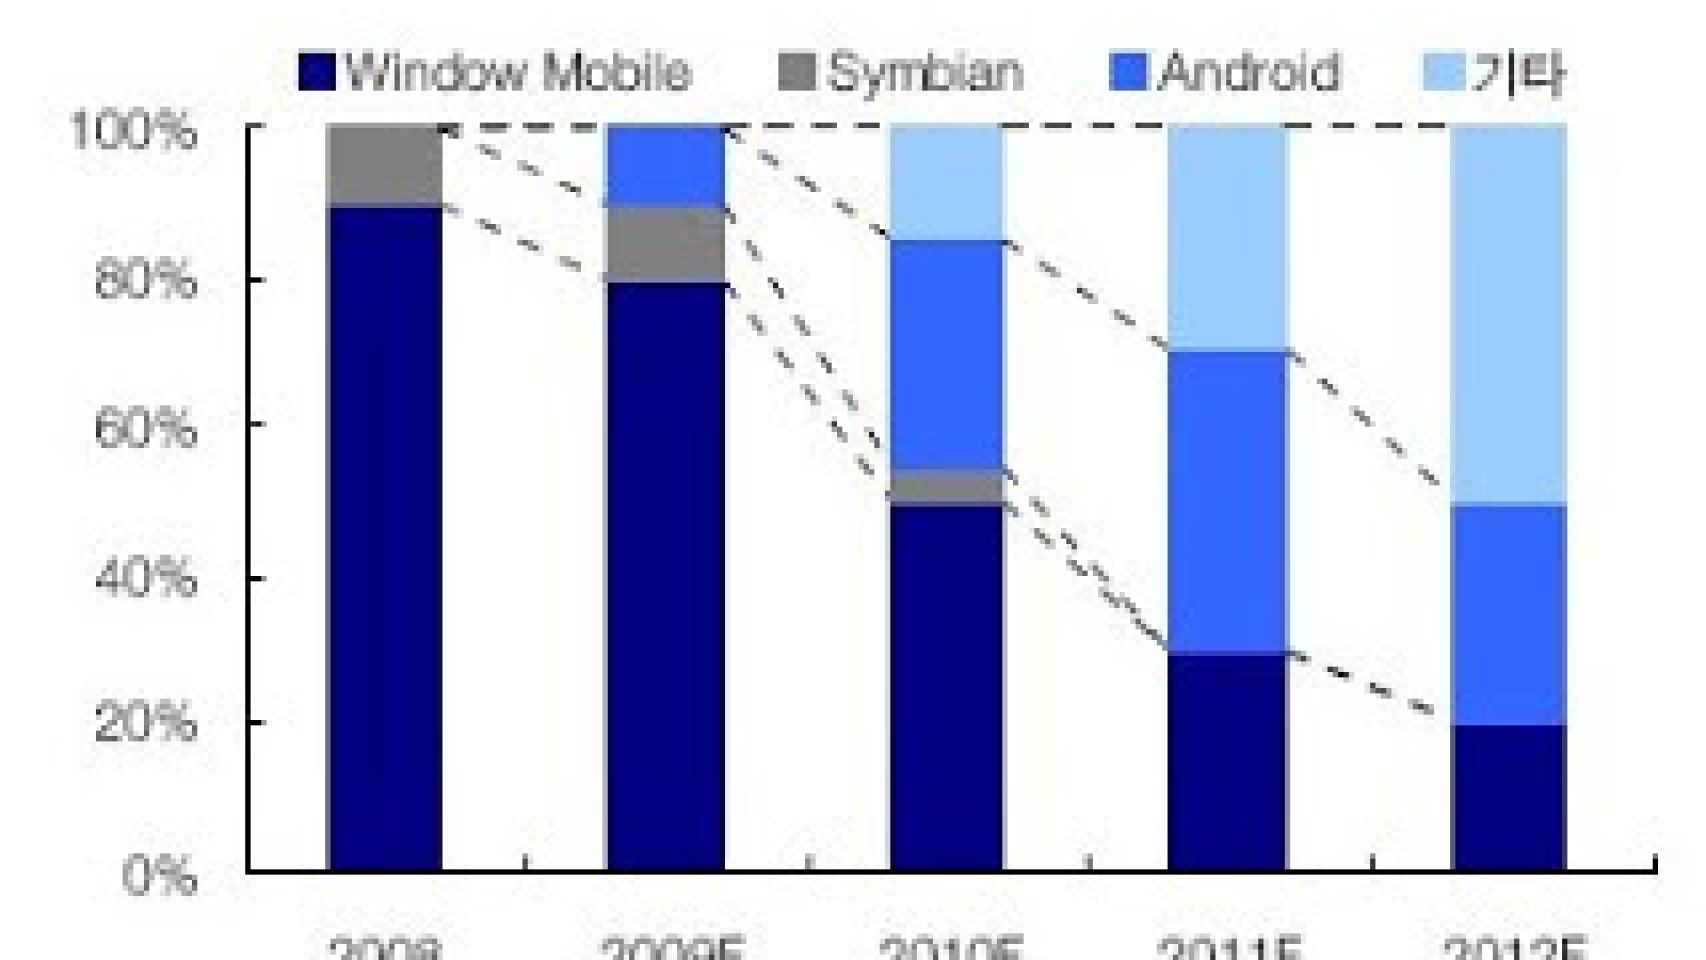 Android VS Windows Mobile